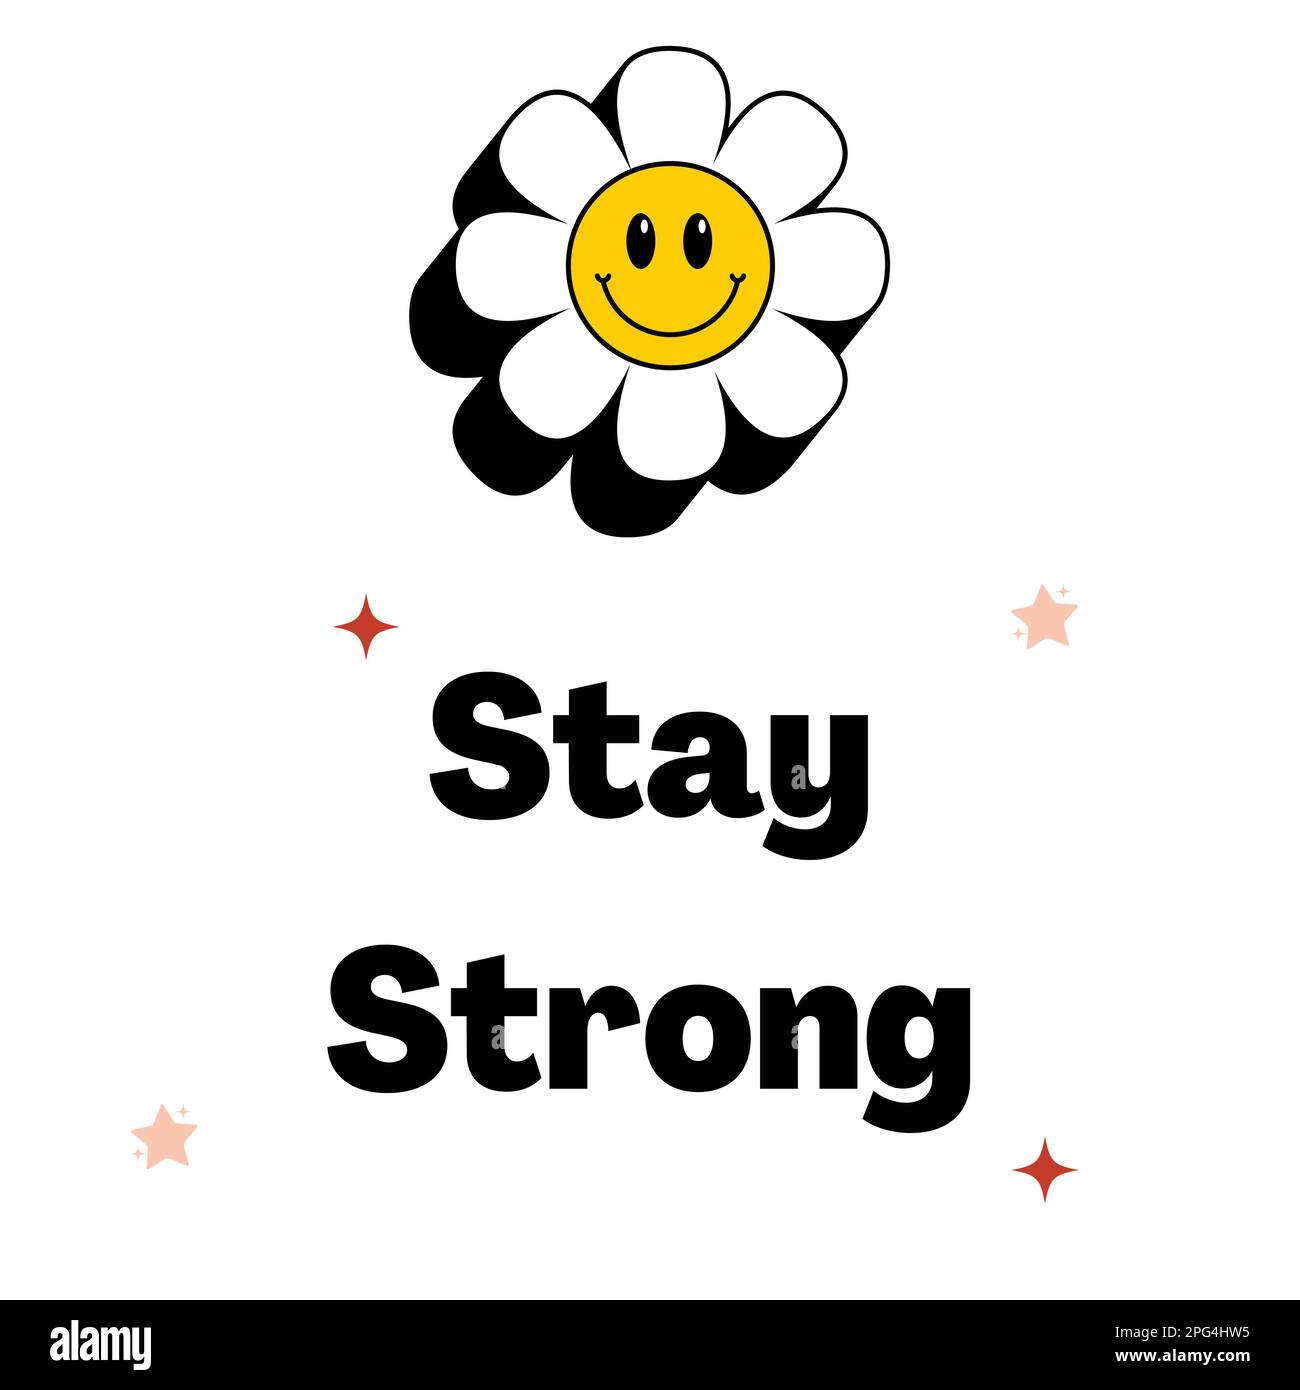 Stay strong Stock Vector